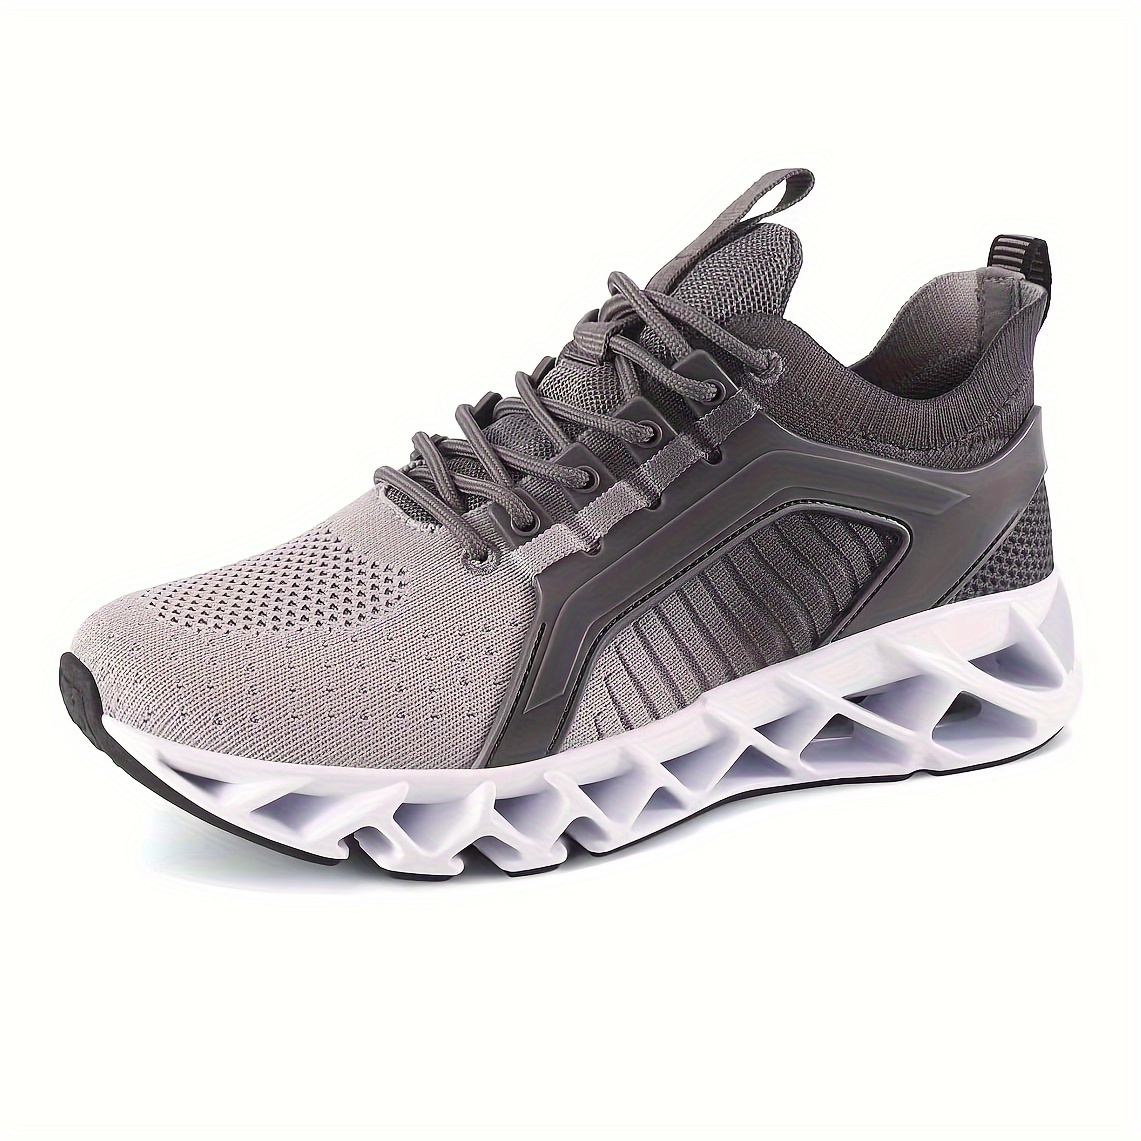 athletic shoes women s breathable casual low top gym fitness details 0